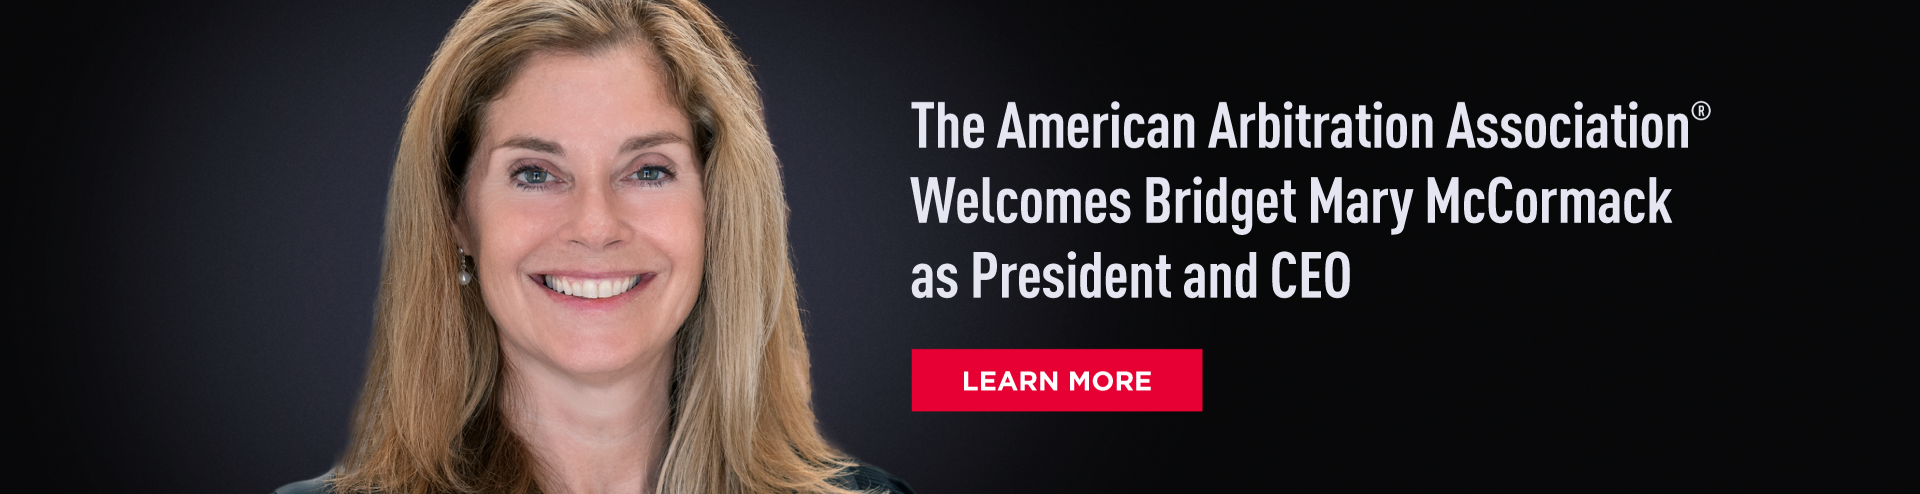 AAA Welcomes Bridget Mary McCormack as President and CEO